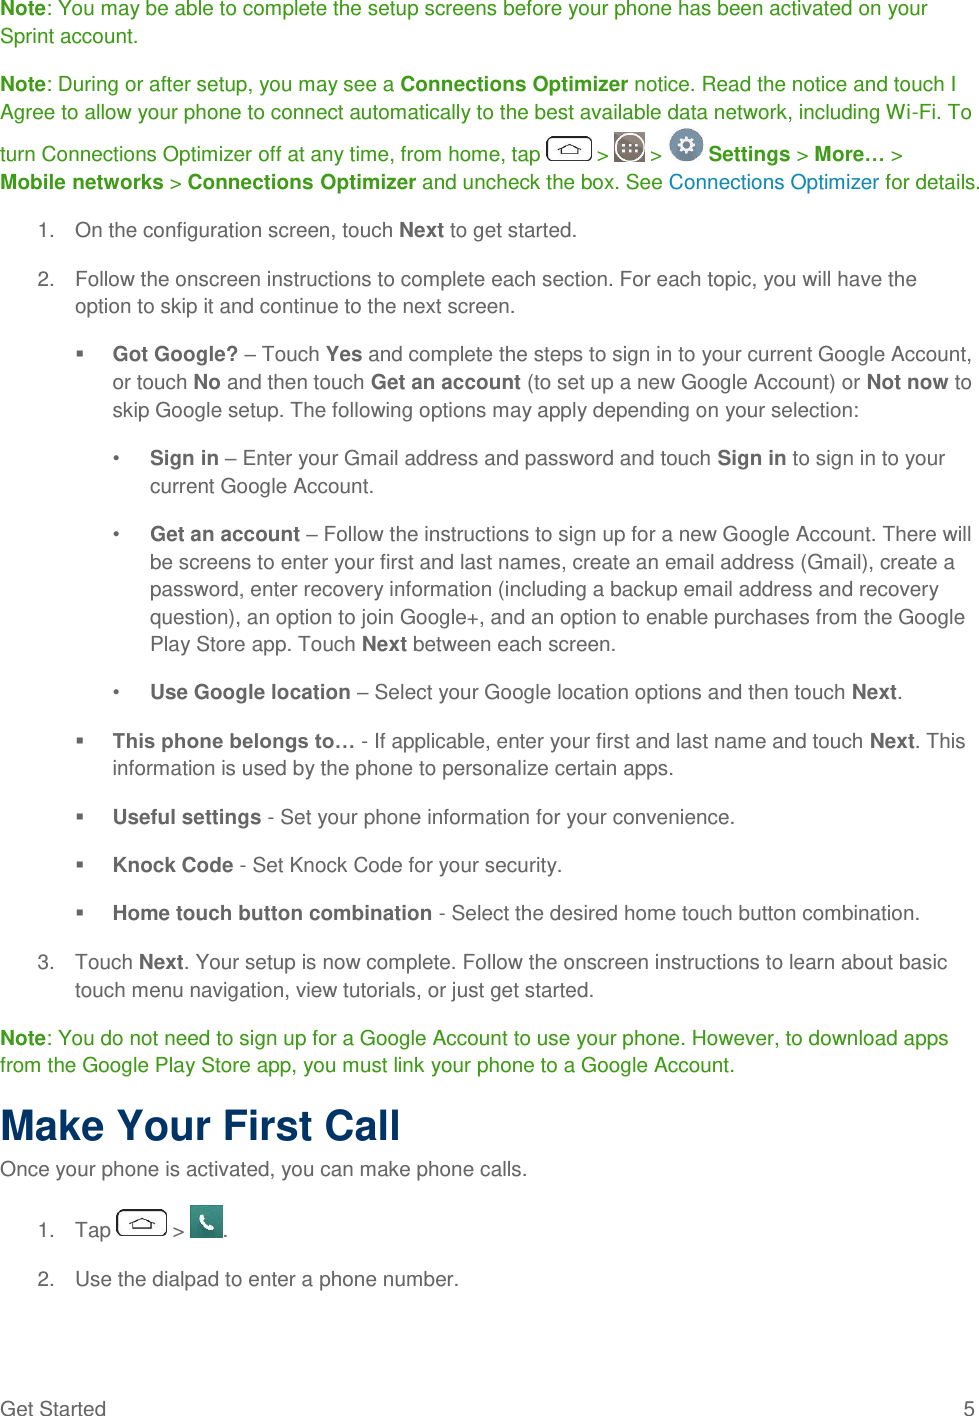 Get Started  5 Note: You may be able to complete the setup screens before your phone has been activated on your Sprint account. Note: During or after setup, you may see a Connections Optimizer notice. Read the notice and touch I Agree to allow your phone to connect automatically to the best available data network, including Wi-Fi. To turn Connections Optimizer off at any time, from home, tap   &gt;   &gt;   Settings &gt; More… &gt; Mobile networks &gt; Connections Optimizer and uncheck the box. See Connections Optimizer for details. 1.  On the configuration screen, touch Next to get started. 2.  Follow the onscreen instructions to complete each section. For each topic, you will have the option to skip it and continue to the next screen.  Got Google? – Touch Yes and complete the steps to sign in to your current Google Account, or touch No and then touch Get an account (to set up a new Google Account) or Not now to skip Google setup. The following options may apply depending on your selection: • Sign in – Enter your Gmail address and password and touch Sign in to sign in to your current Google Account. • Get an account – Follow the instructions to sign up for a new Google Account. There will be screens to enter your first and last names, create an email address (Gmail), create a password, enter recovery information (including a backup email address and recovery question), an option to join Google+, and an option to enable purchases from the Google Play Store app. Touch Next between each screen. • Use Google location – Select your Google location options and then touch Next.  This phone belongs to… - If applicable, enter your first and last name and touch Next. This information is used by the phone to personalize certain apps.  Useful settings - Set your phone information for your convenience.  Knock Code - Set Knock Code for your security.  Home touch button combination - Select the desired home touch button combination. 3.  Touch Next. Your setup is now complete. Follow the onscreen instructions to learn about basic touch menu navigation, view tutorials, or just get started. Note: You do not need to sign up for a Google Account to use your phone. However, to download apps from the Google Play Store app, you must link your phone to a Google Account. Make Your First Call Once your phone is activated, you can make phone calls. 1.  Tap   &gt;  . 2.  Use the dialpad to enter a phone number. 